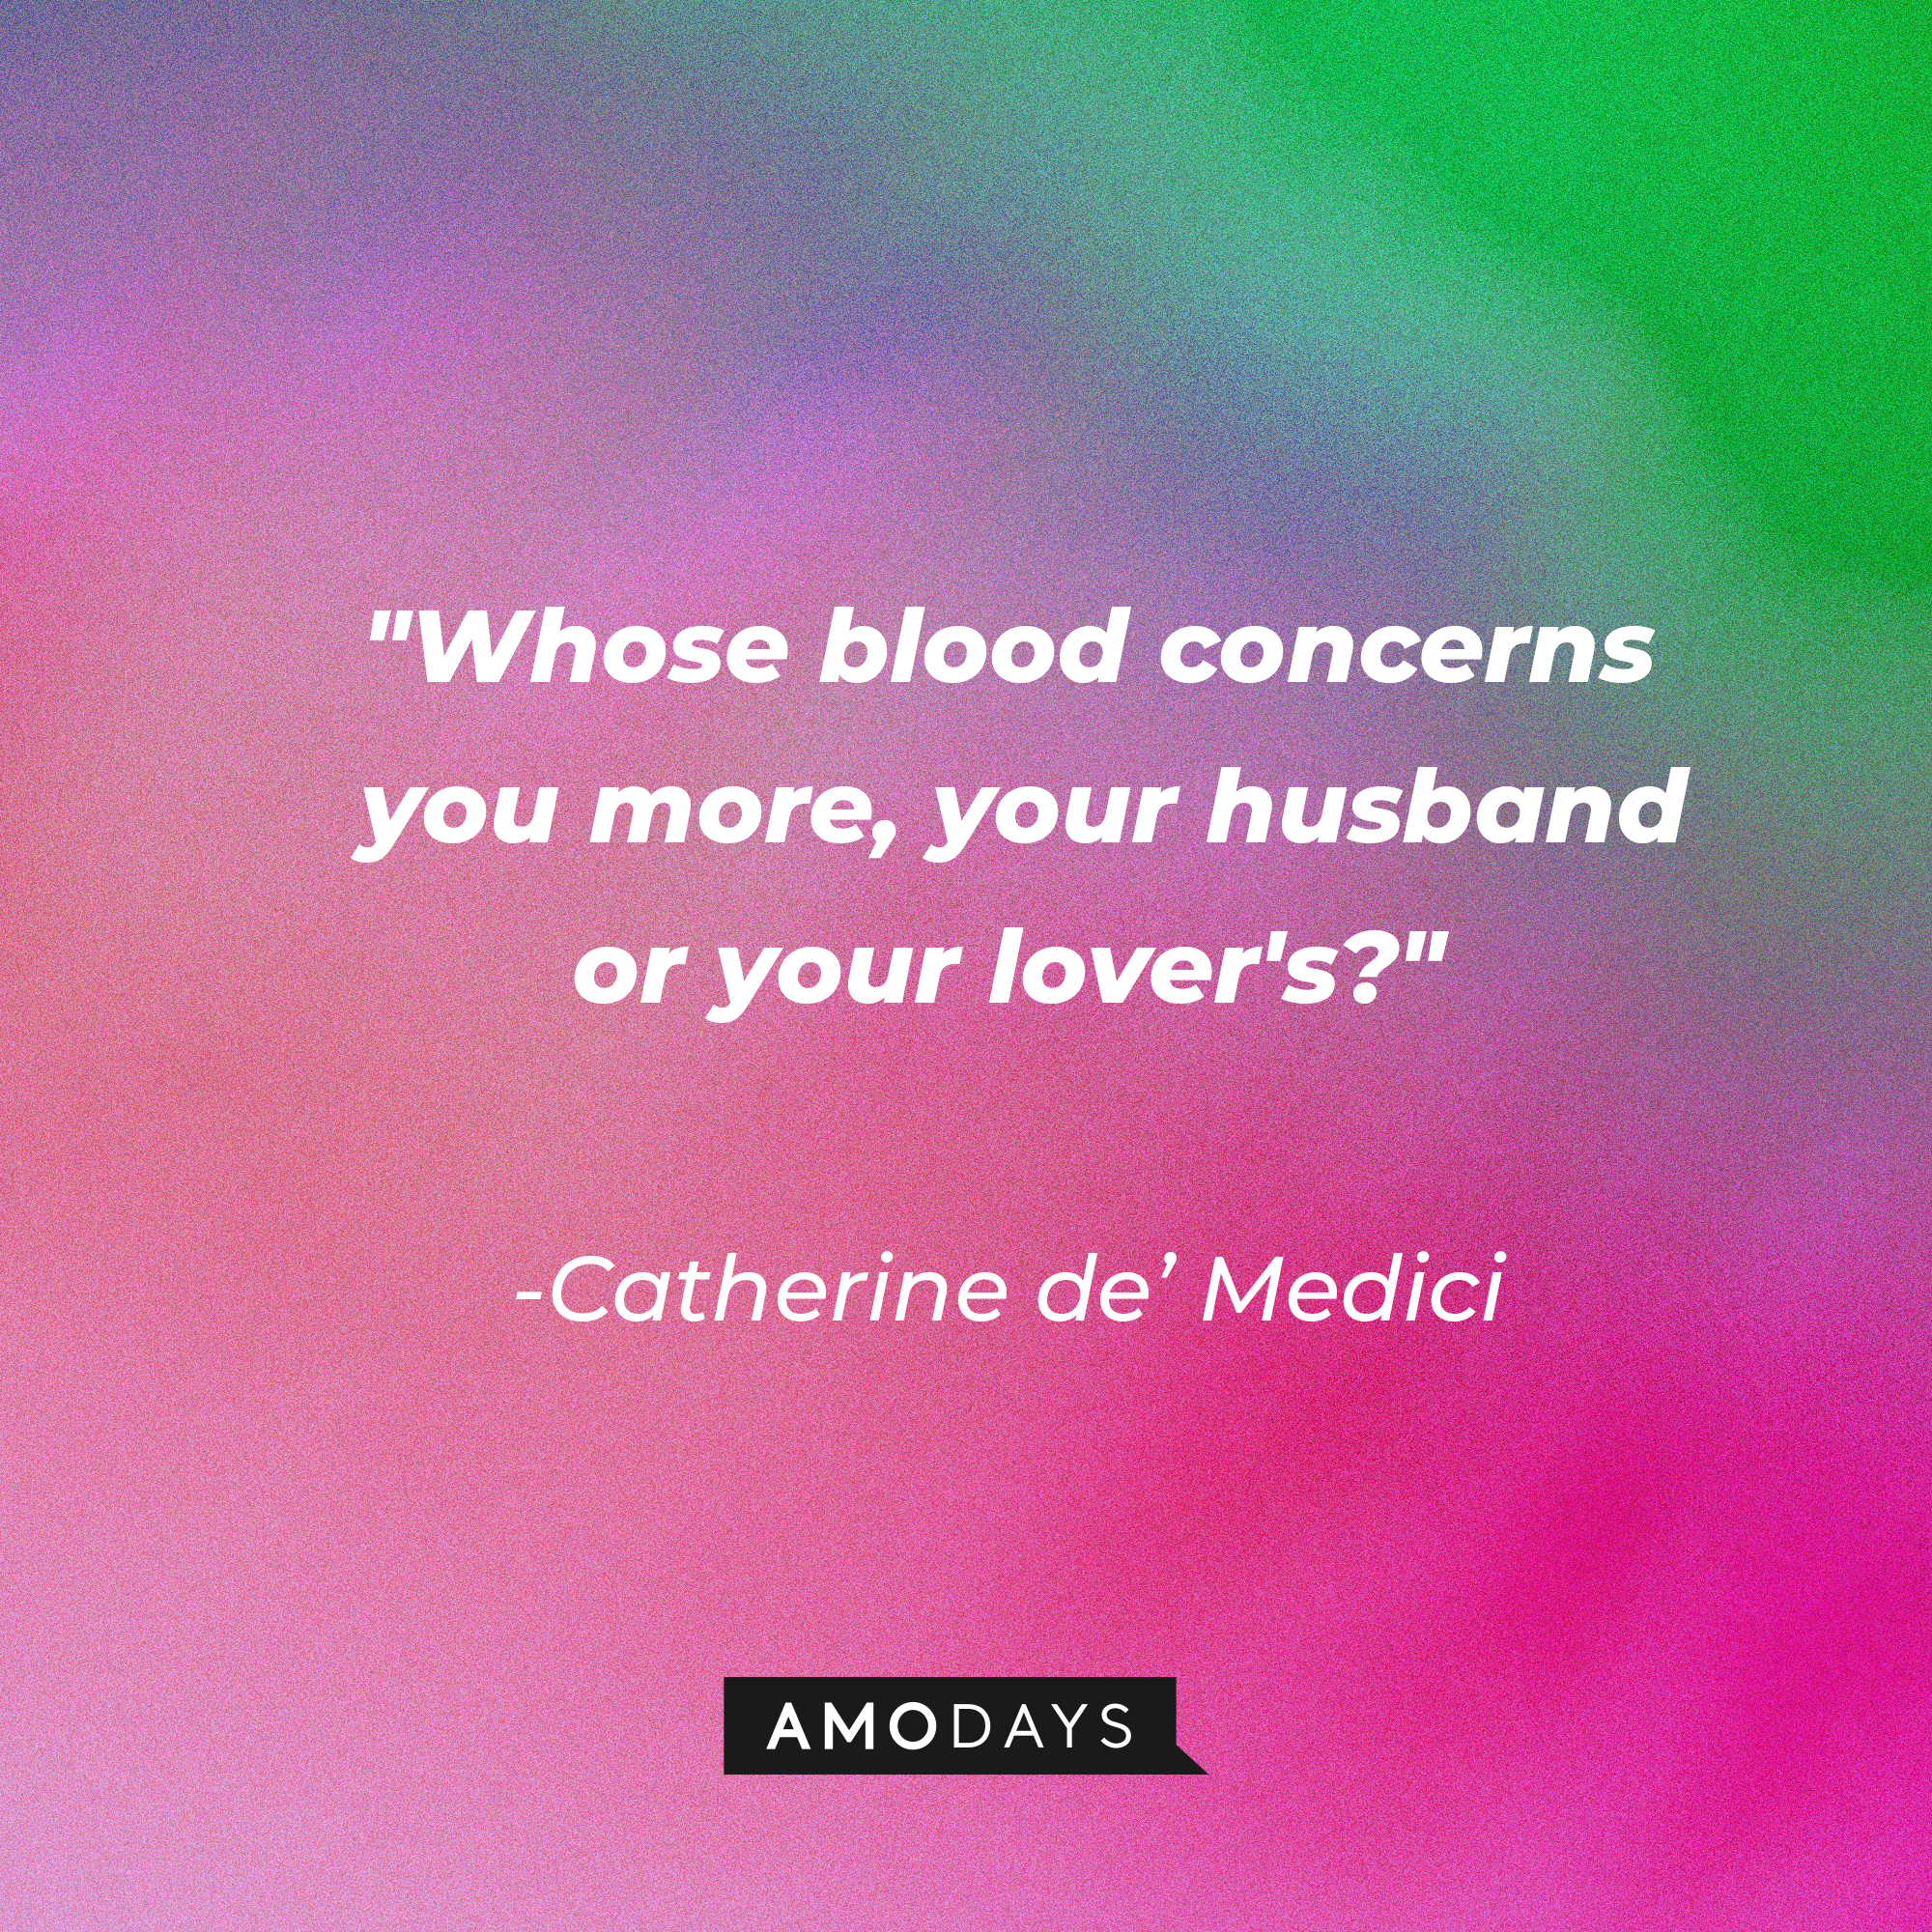 Catherine de’ Medici's quote in "Reign:" "Whose blood concerns you more, your husband or your lover's?" | Source: Amodays